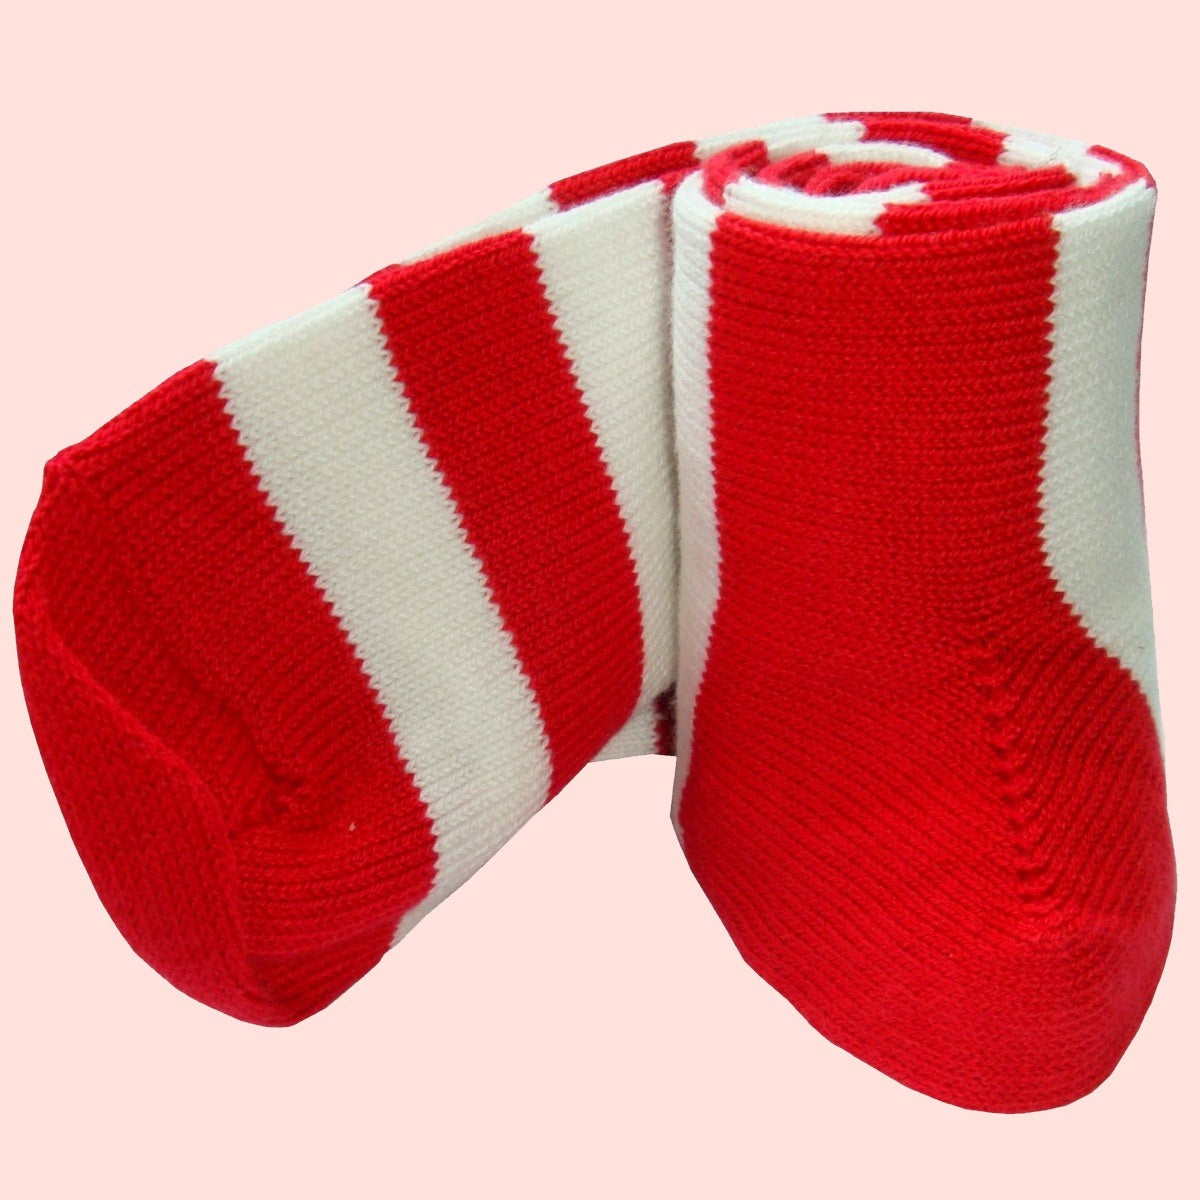 buy|red|white|hooped|striped|cotton|football|socks|shop|bassinandbrown ...